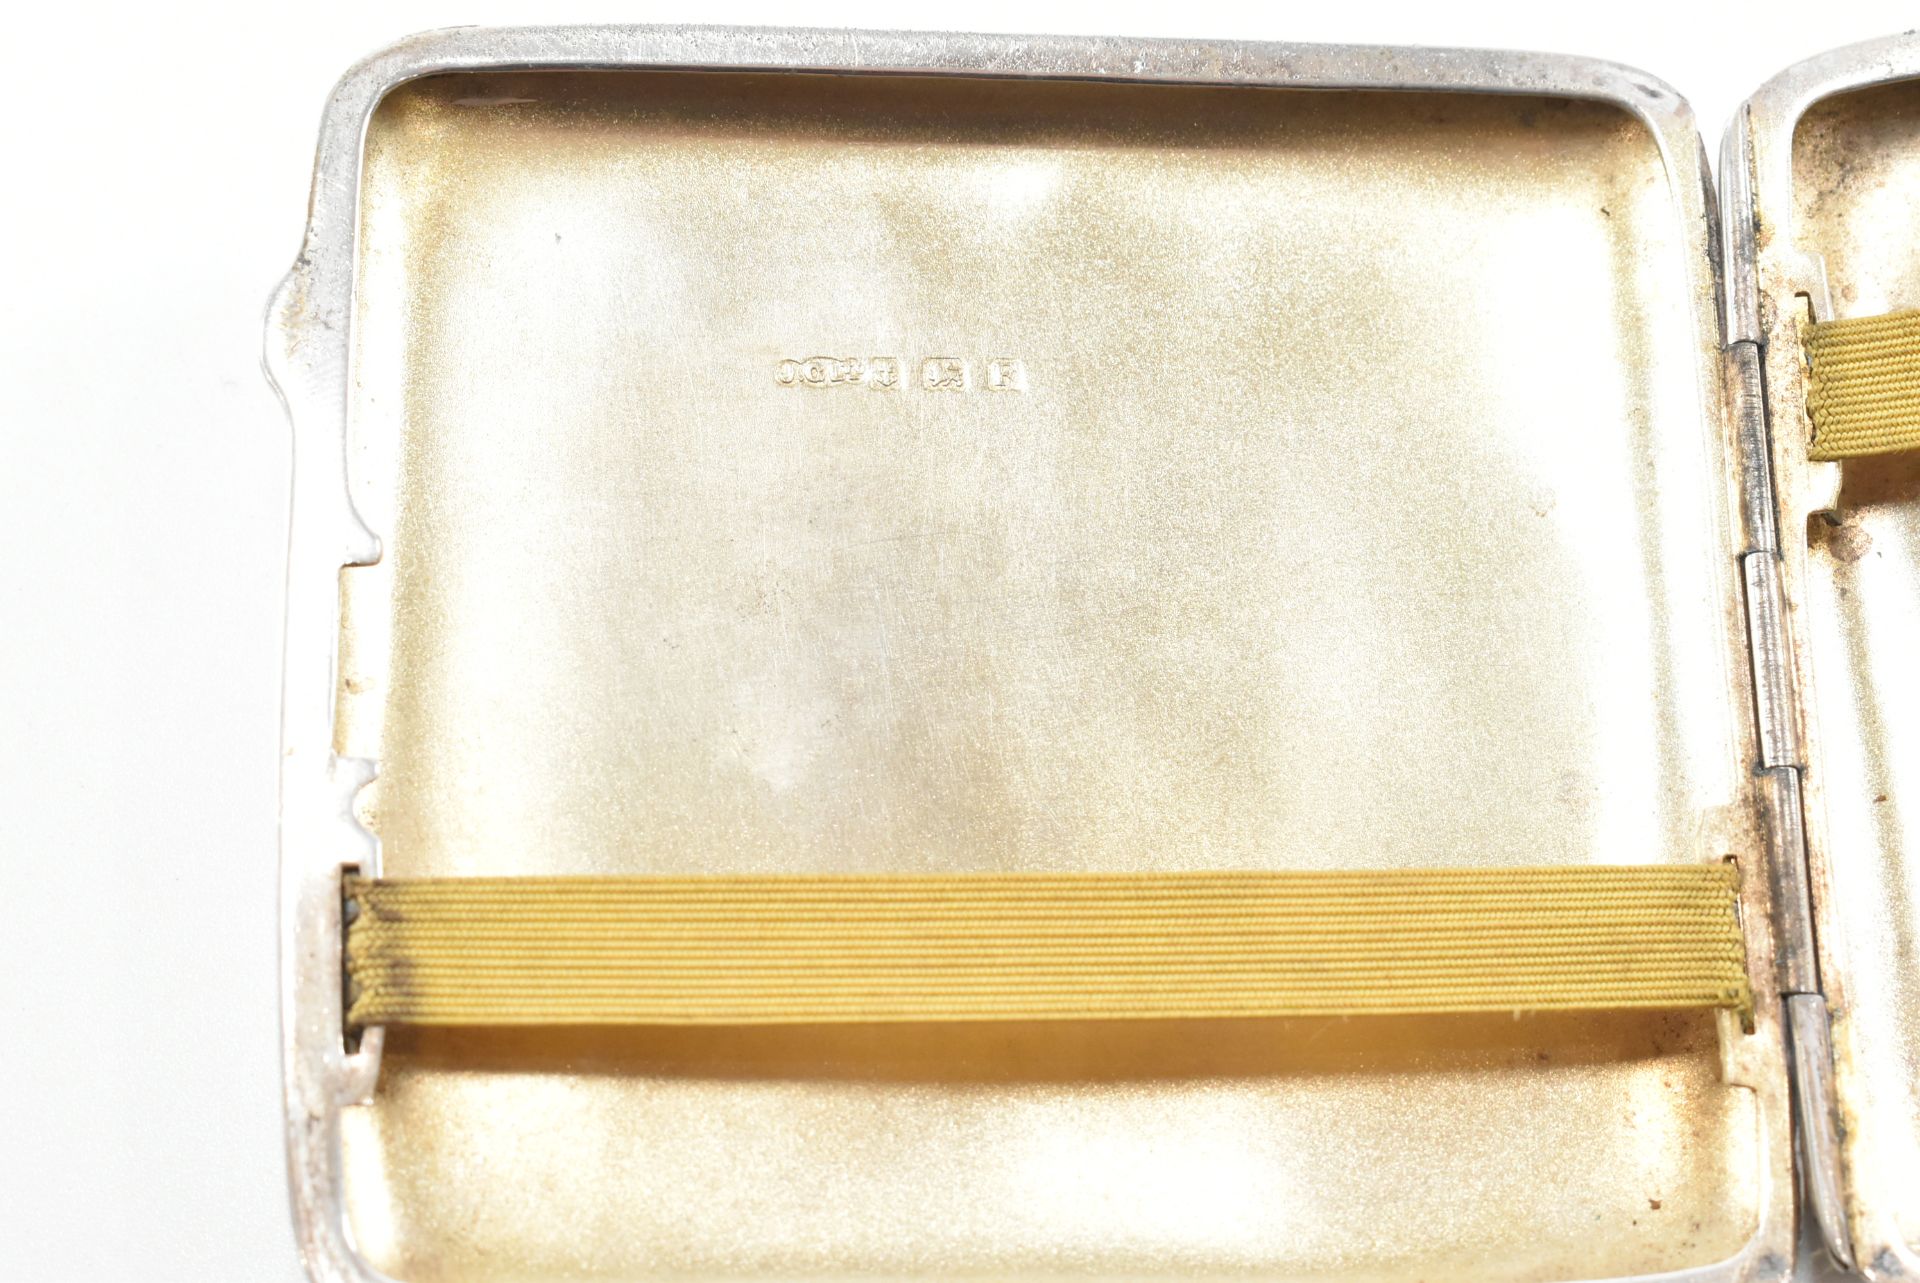 COLLECTION OF EARLY 20TH CENTURY ART DECO HALLMARKED SILVER CIGARETTE & VESTA CASE - Image 11 of 14